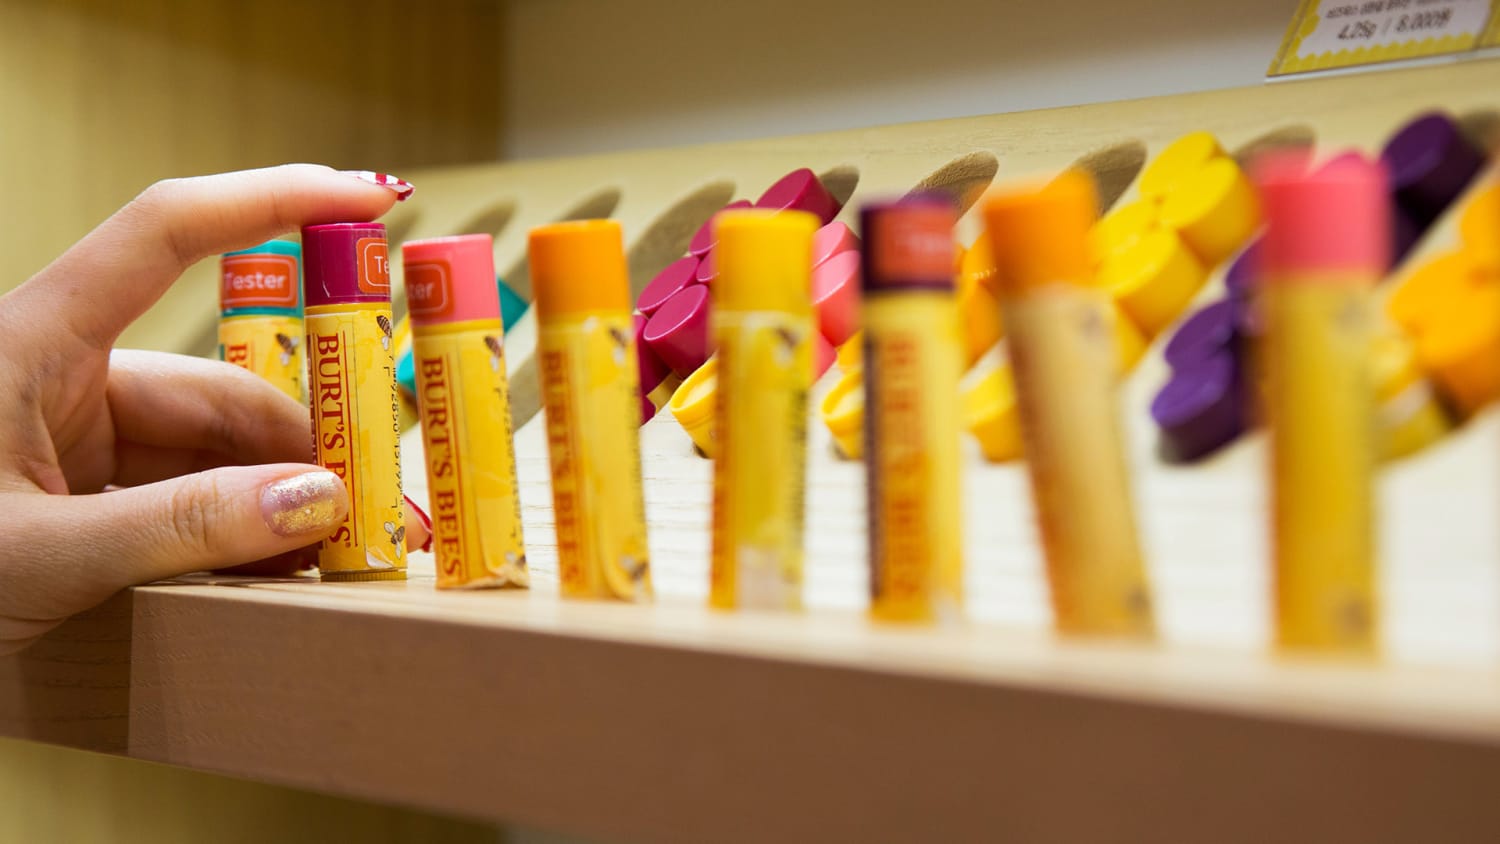 Burts Bees Adds Recycled Content to Lip Balm Tubes - Good 